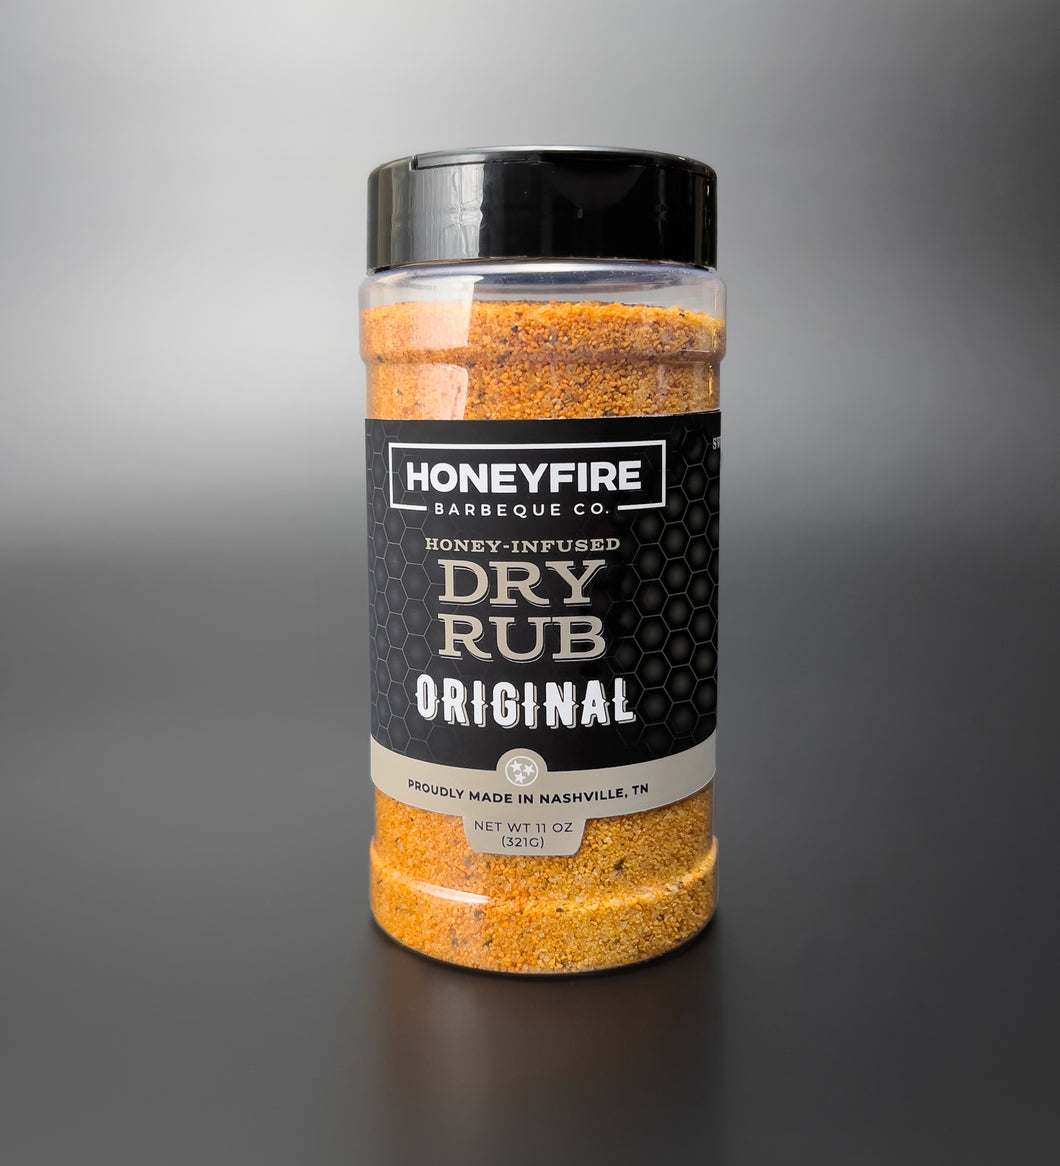 Made with real American honey (dehydrated) and superior spices, our championship-winning Original Honey Dry Rub has the ideal balance of sweet and savory flavors.